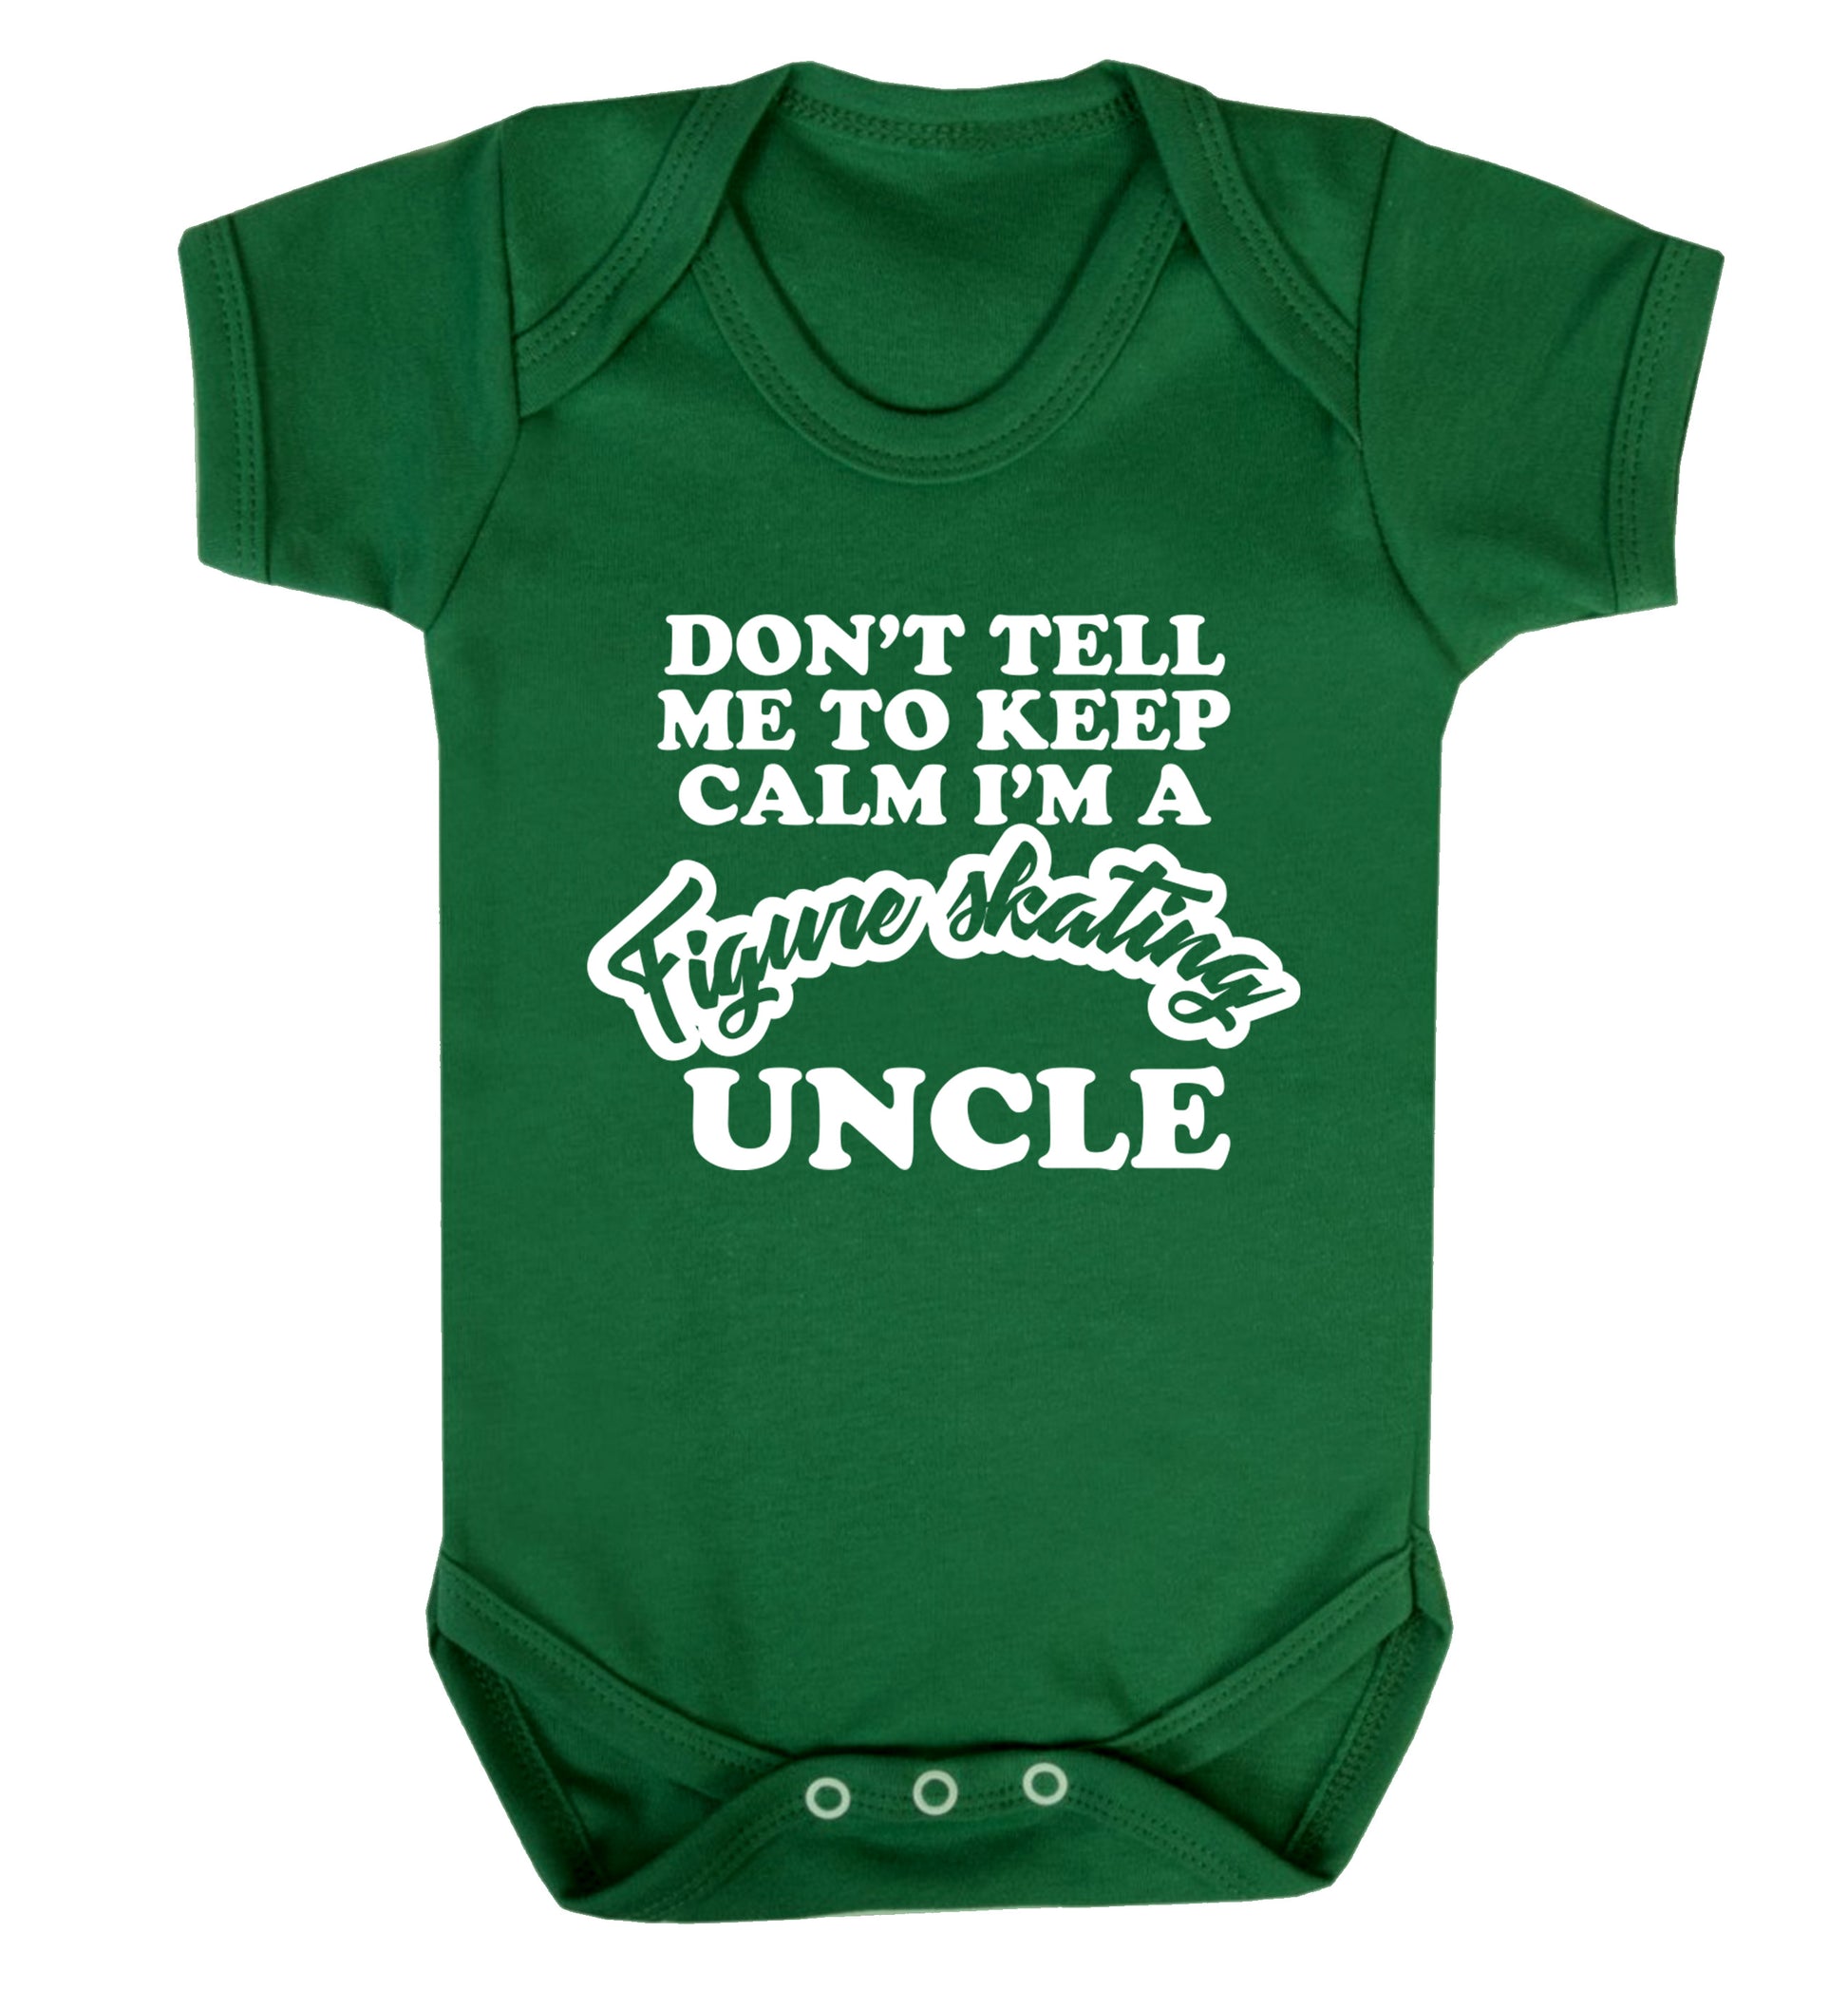 Don't tell me to keep calm I'm a figure skating uncle Baby Vest green 18-24 months